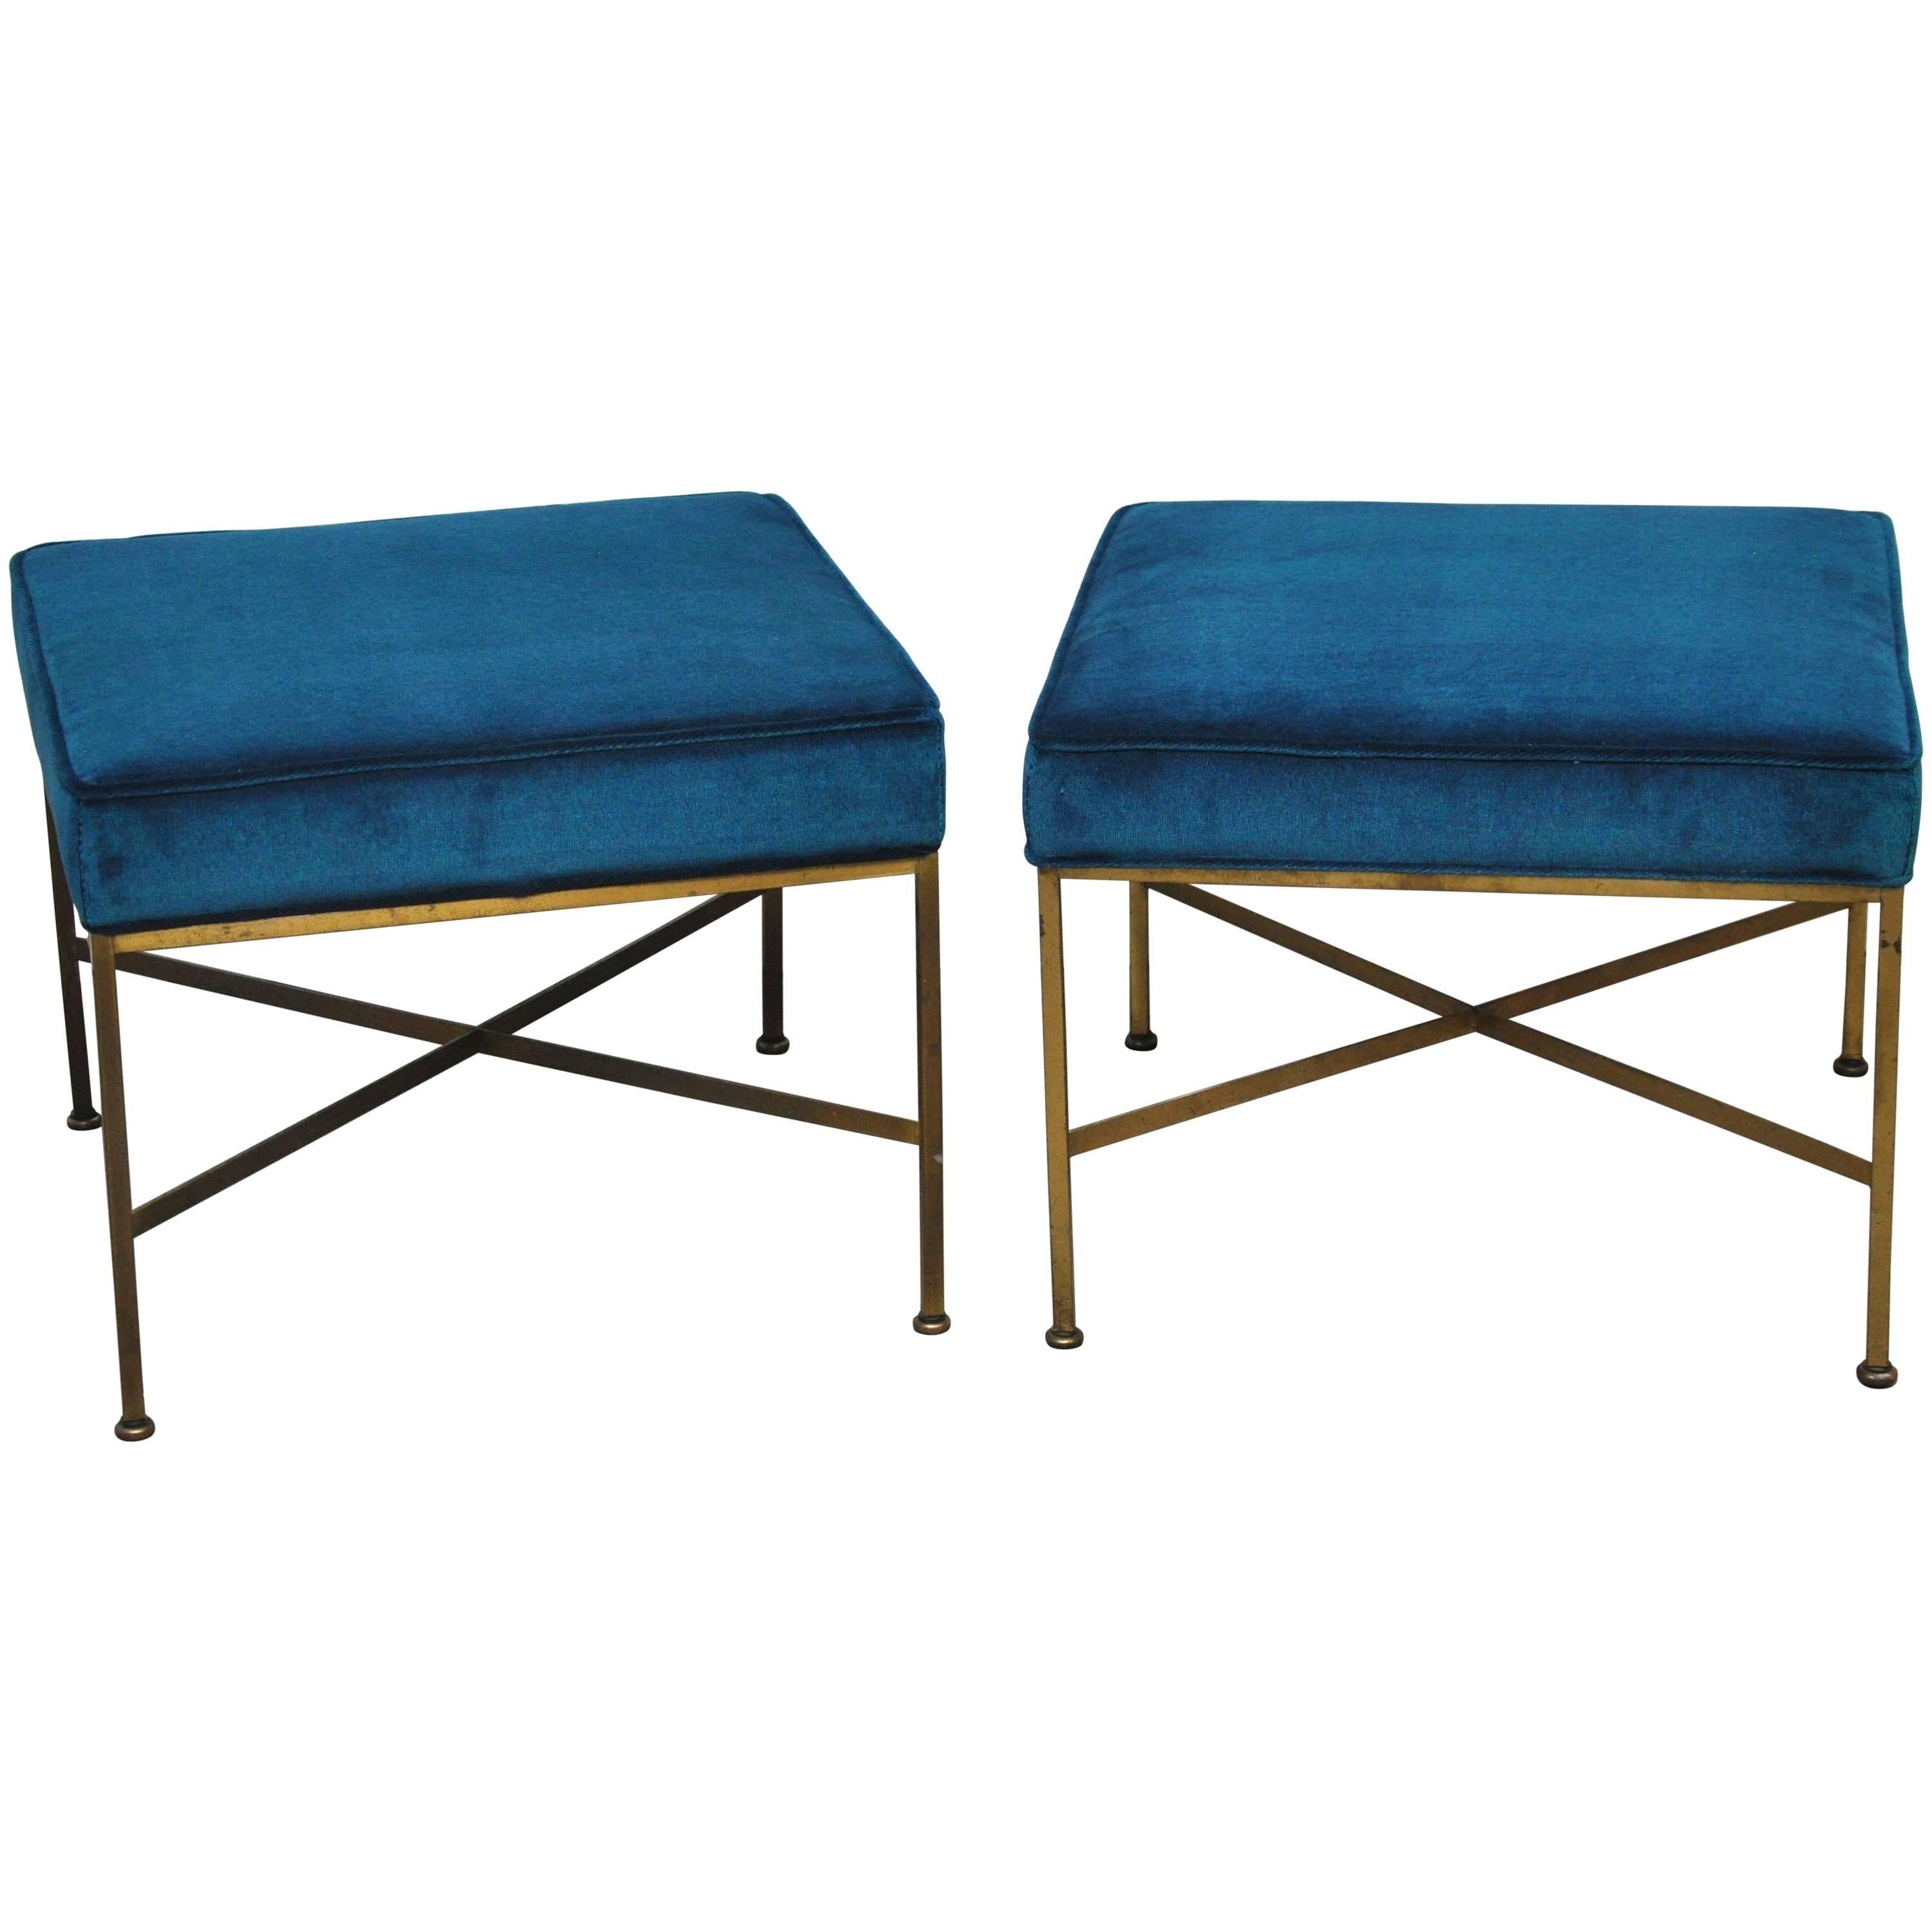 Pair of Brass X-Base Stools by Paul McCobb